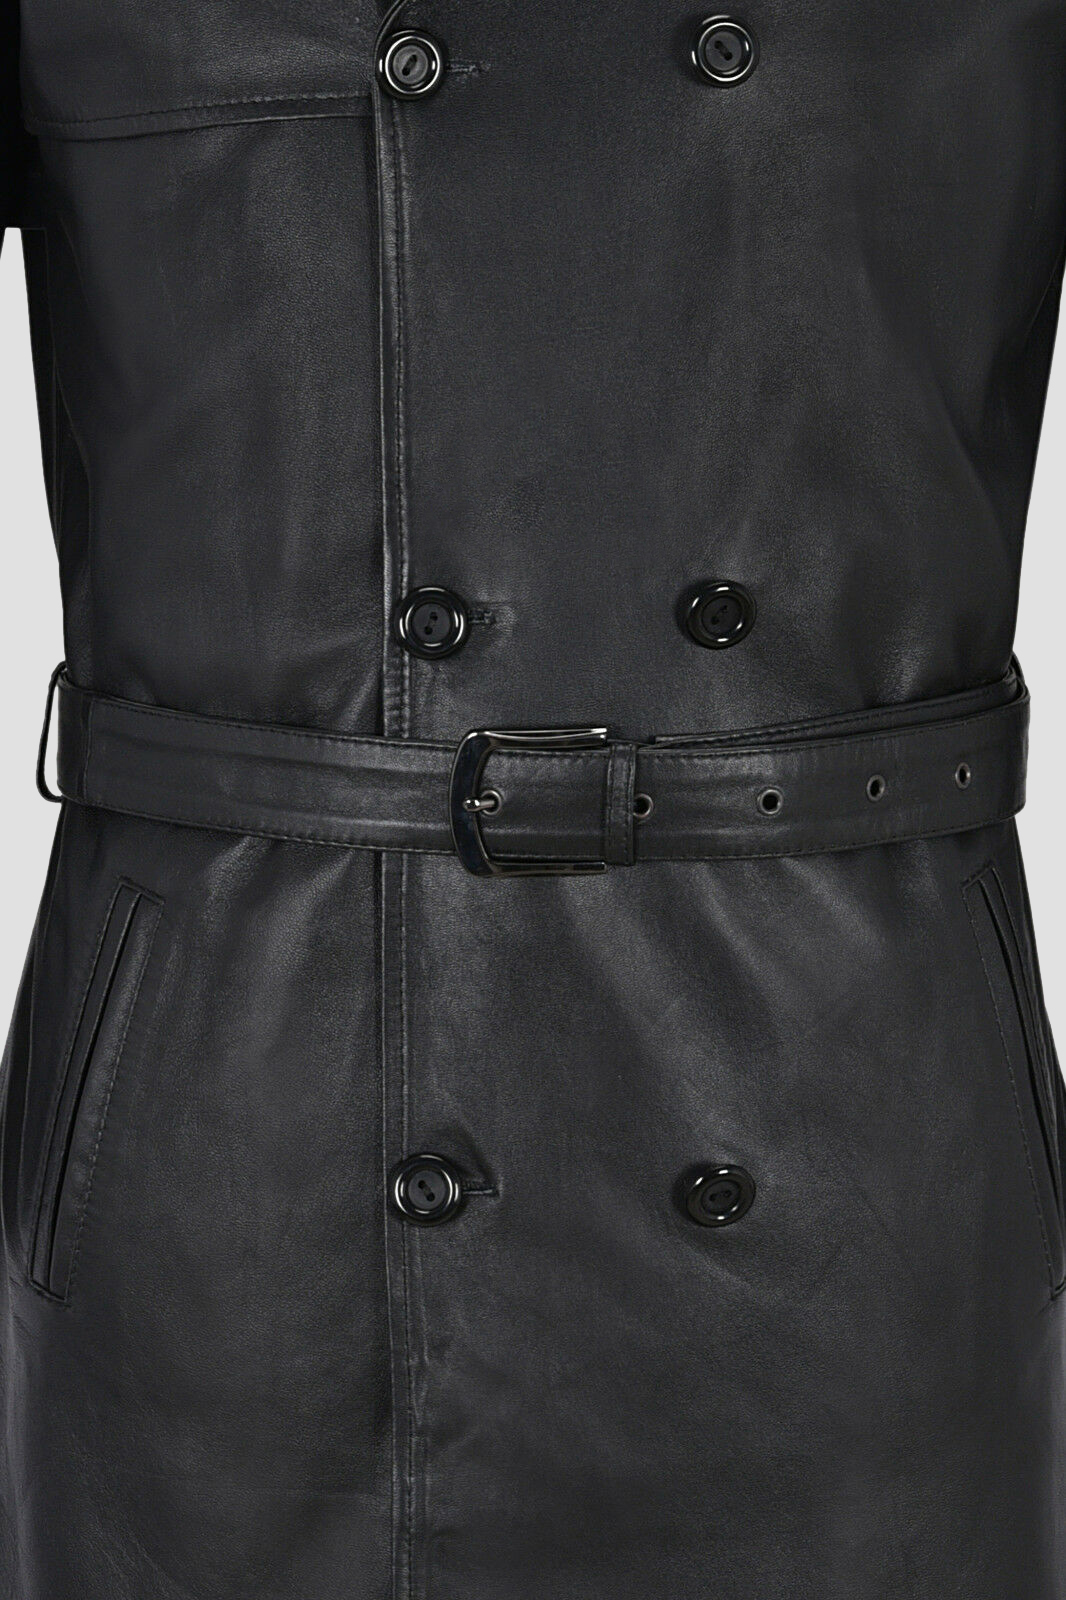 Daniel Black Leather Trench Coat - The Vintage Leather